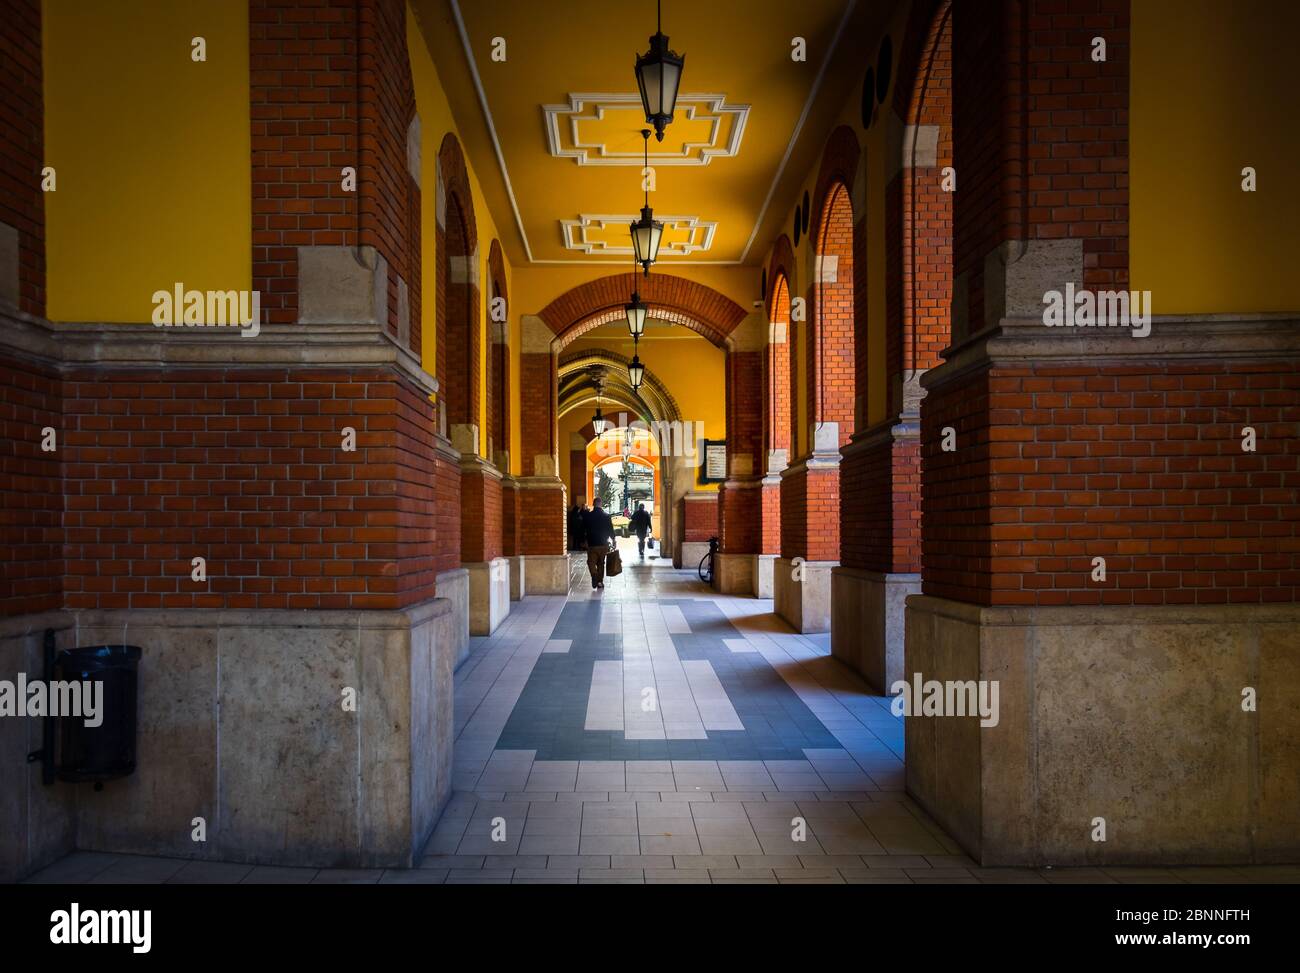 Budapest, Hungary, March 2020, view of the outside alley of the front entrance of the Central Market Hall building Stock Photo